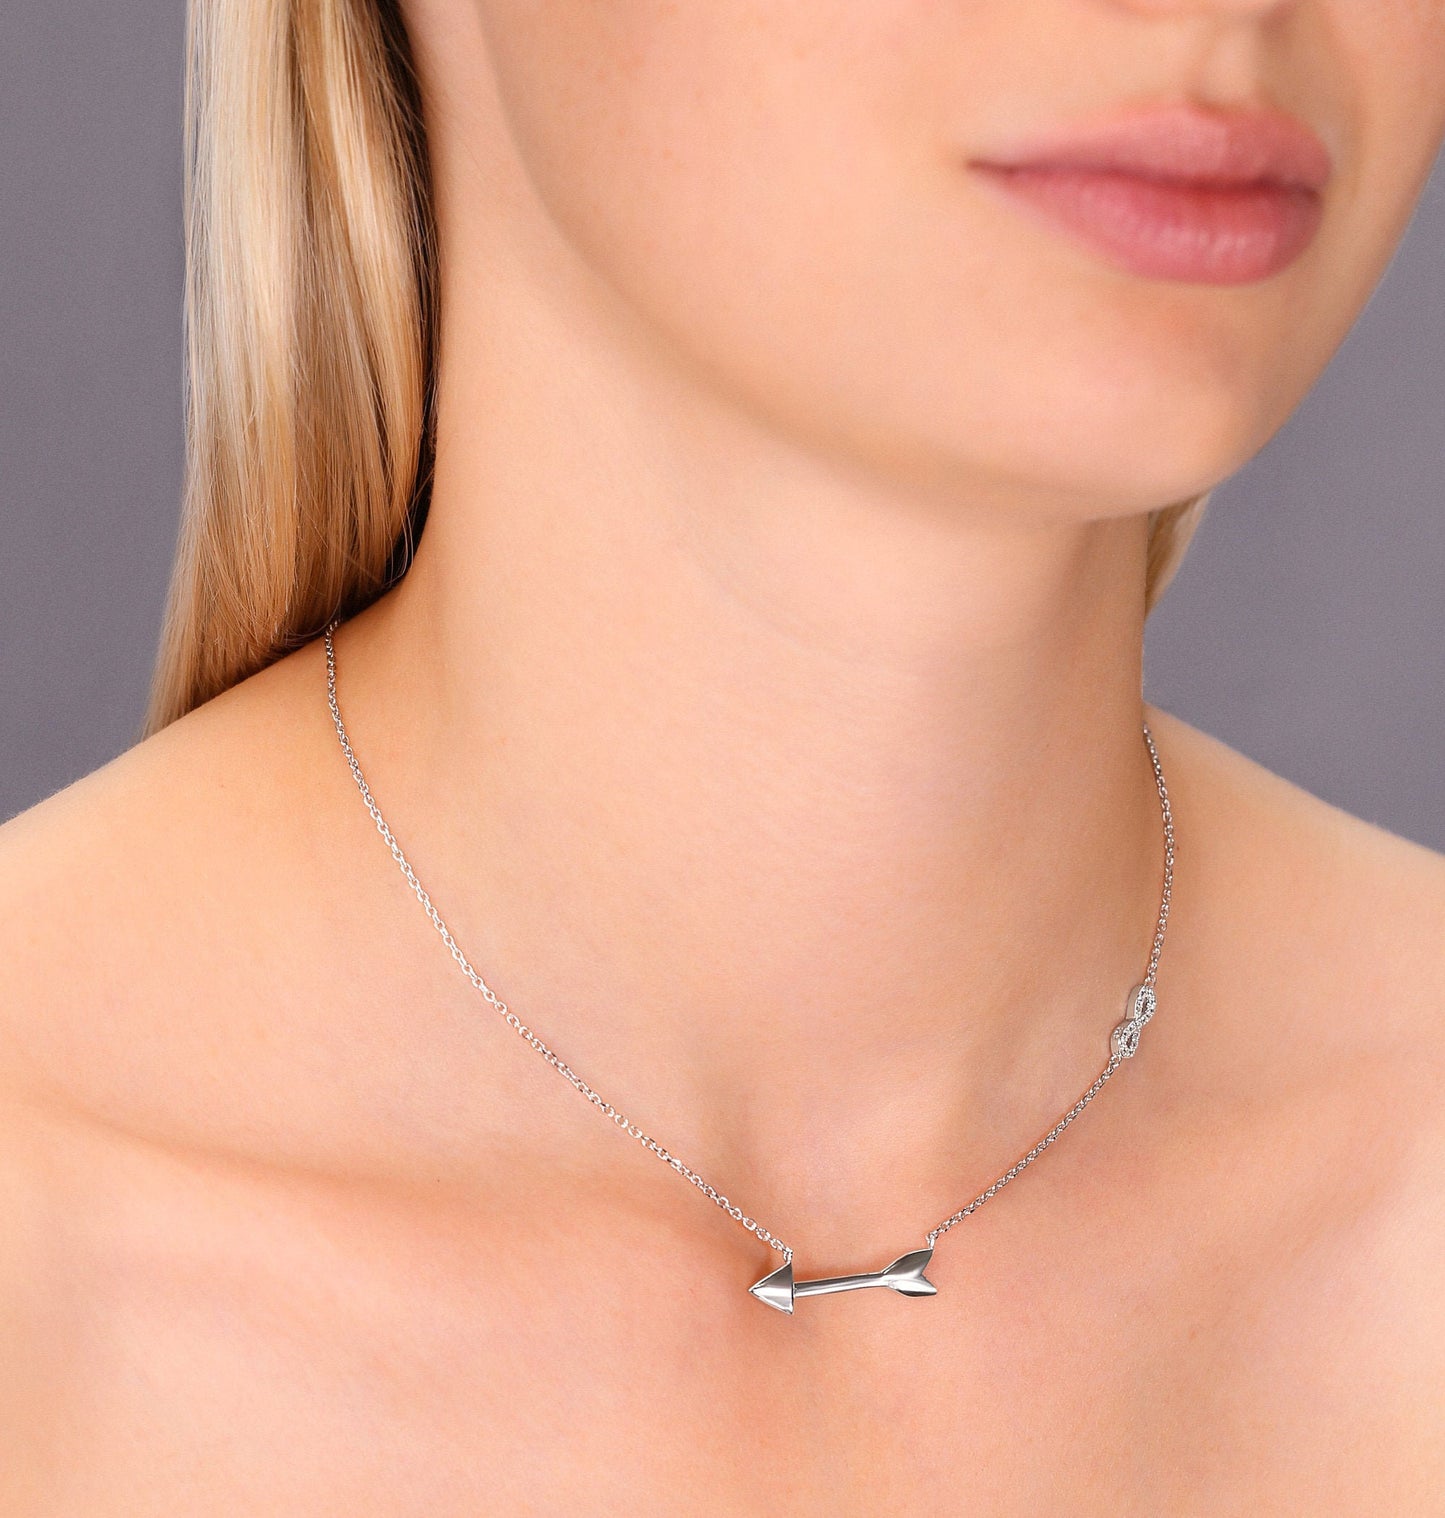 Sterling Silver Infinity and Arrow Necklace with Cubic Zirconia Stones